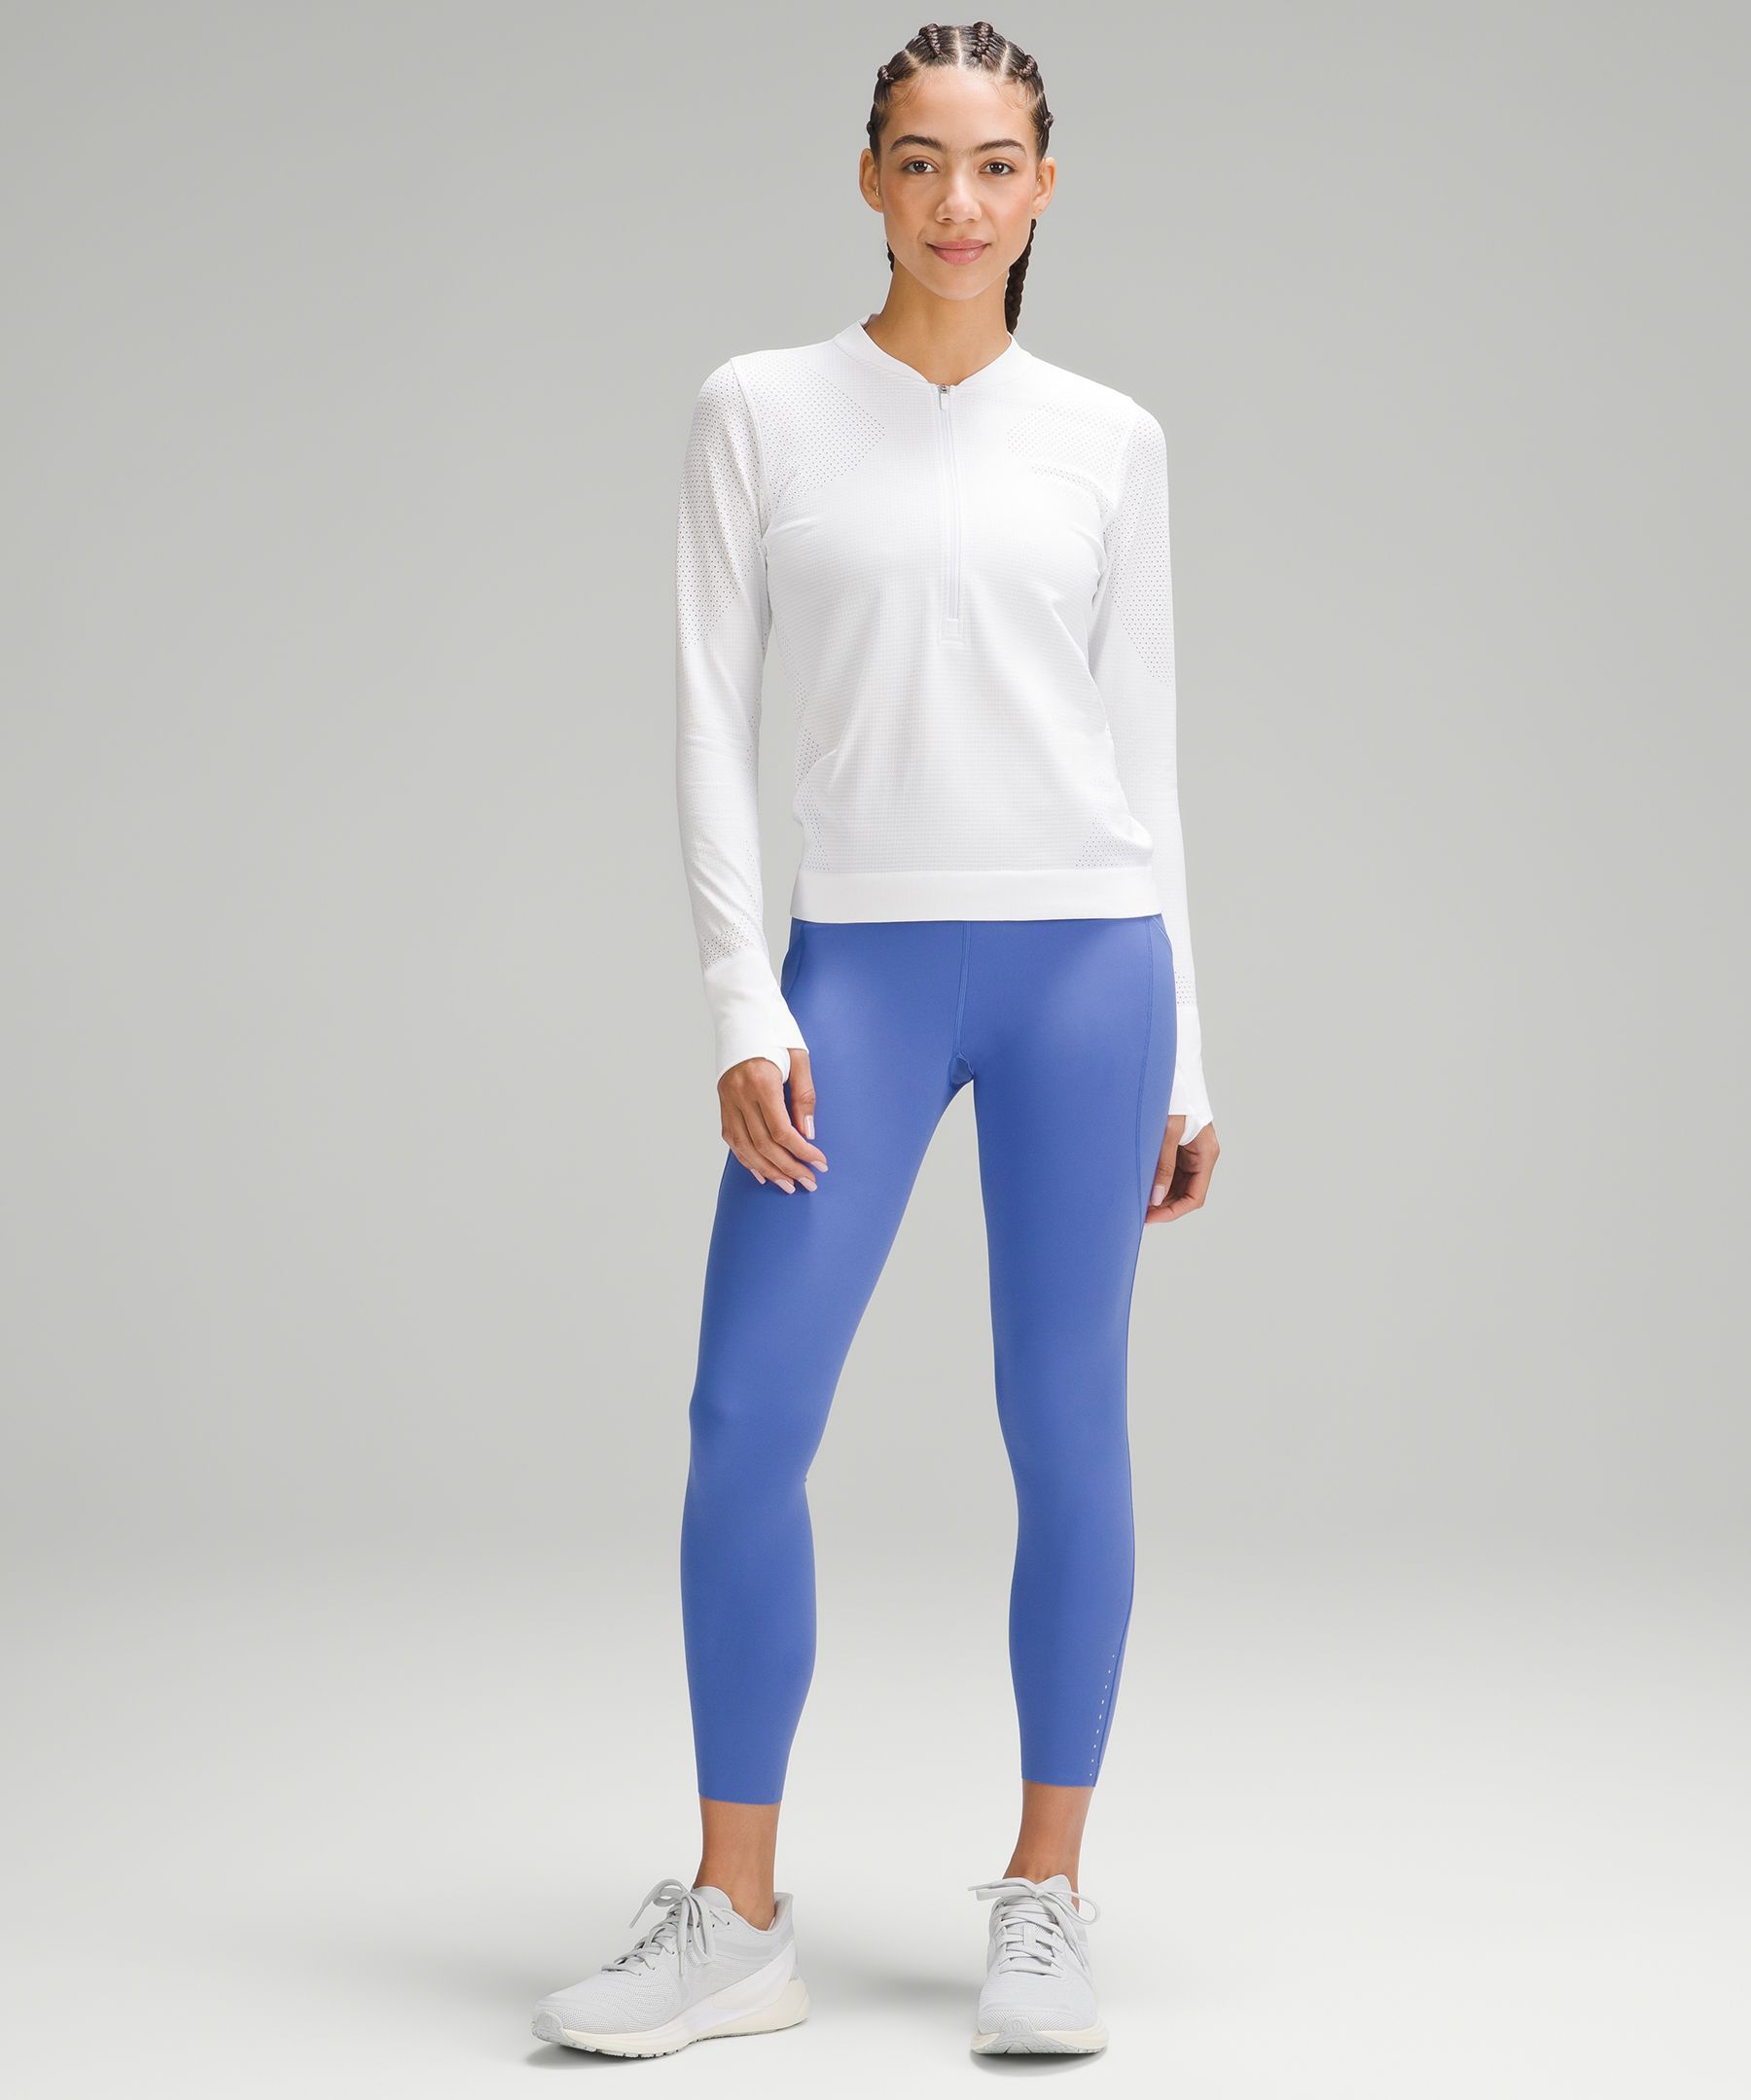 How Much Does it Cost to Make Lululemon Leggings? - Playbite